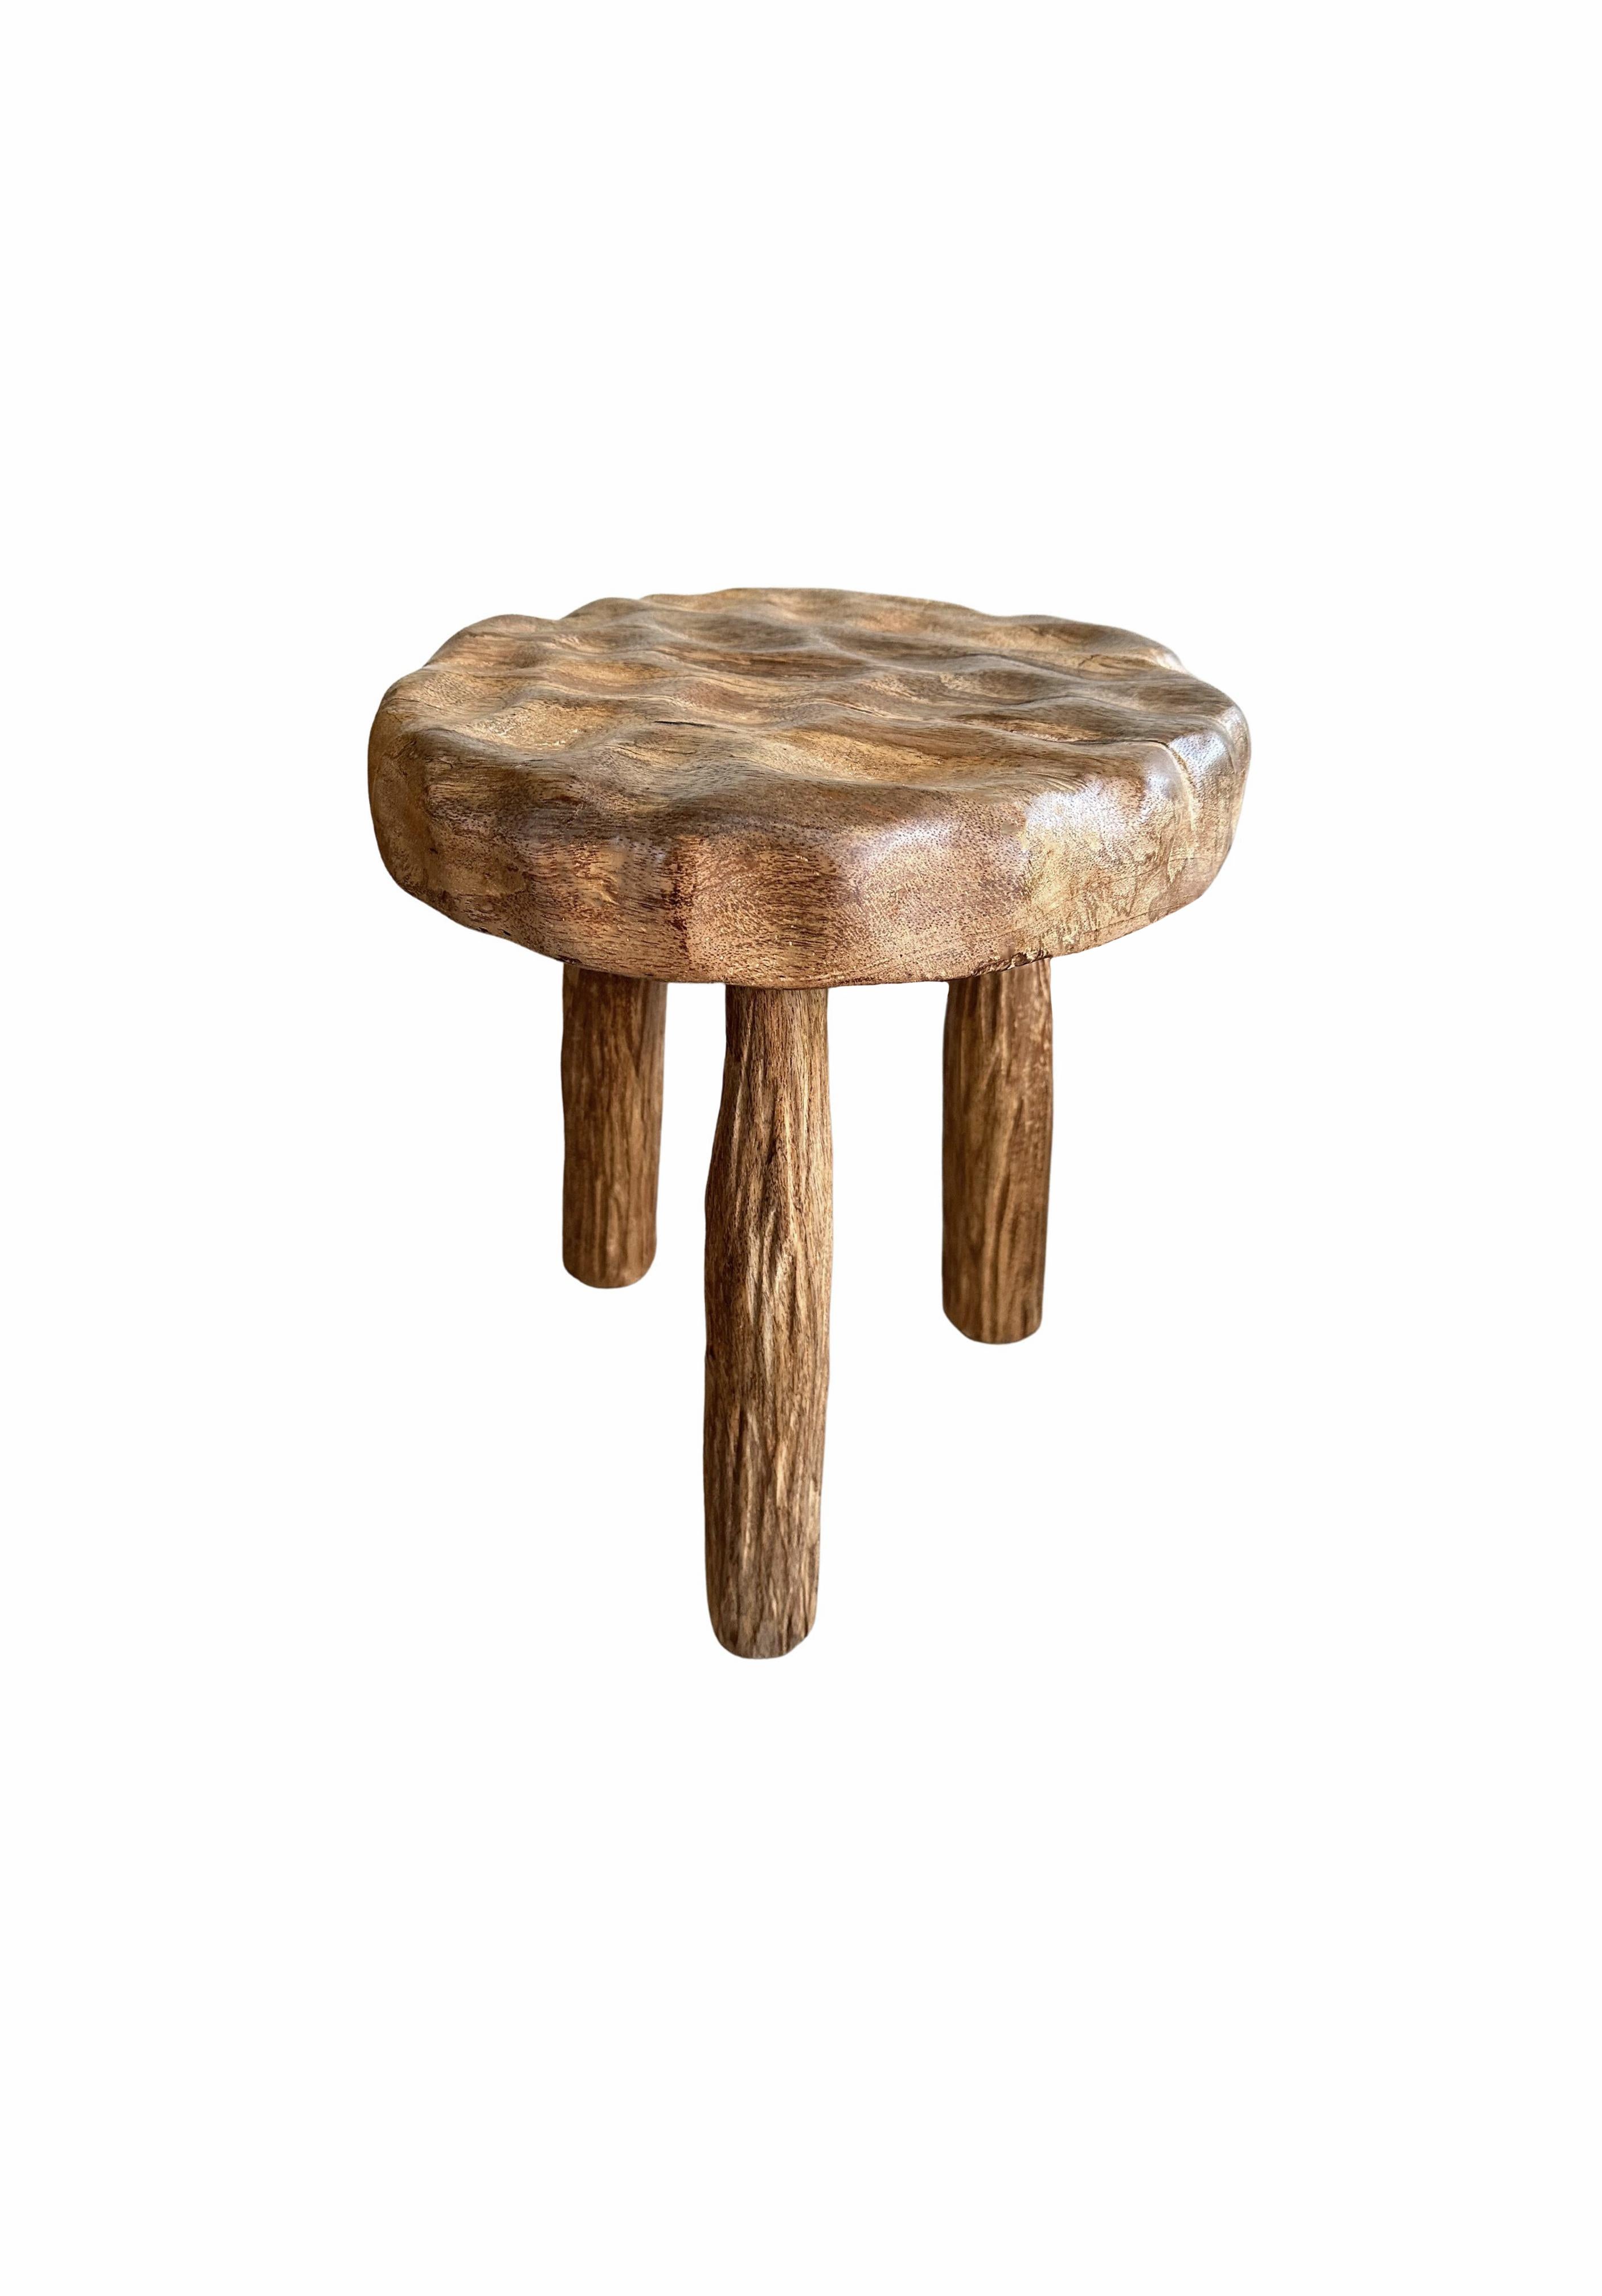 An elegantly rounded, sculptural stool crafted from mango wood. Unique to this stool is the hand-hewn detailing on all sides providing a wonderful contrast of textures.